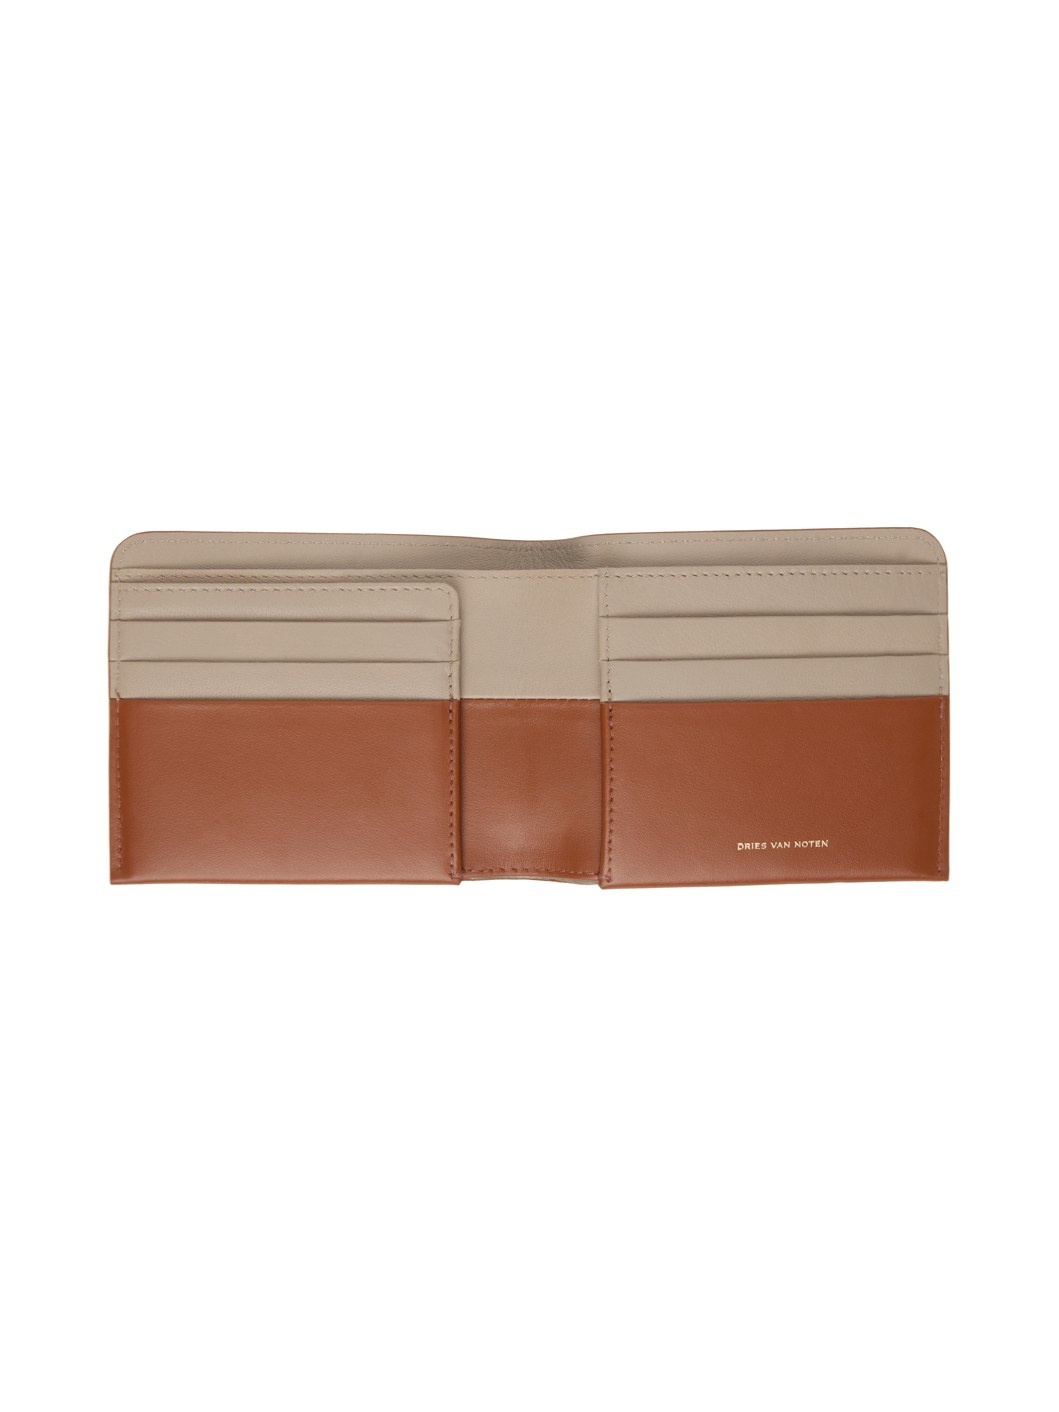 Tan Leather Wallet - 3